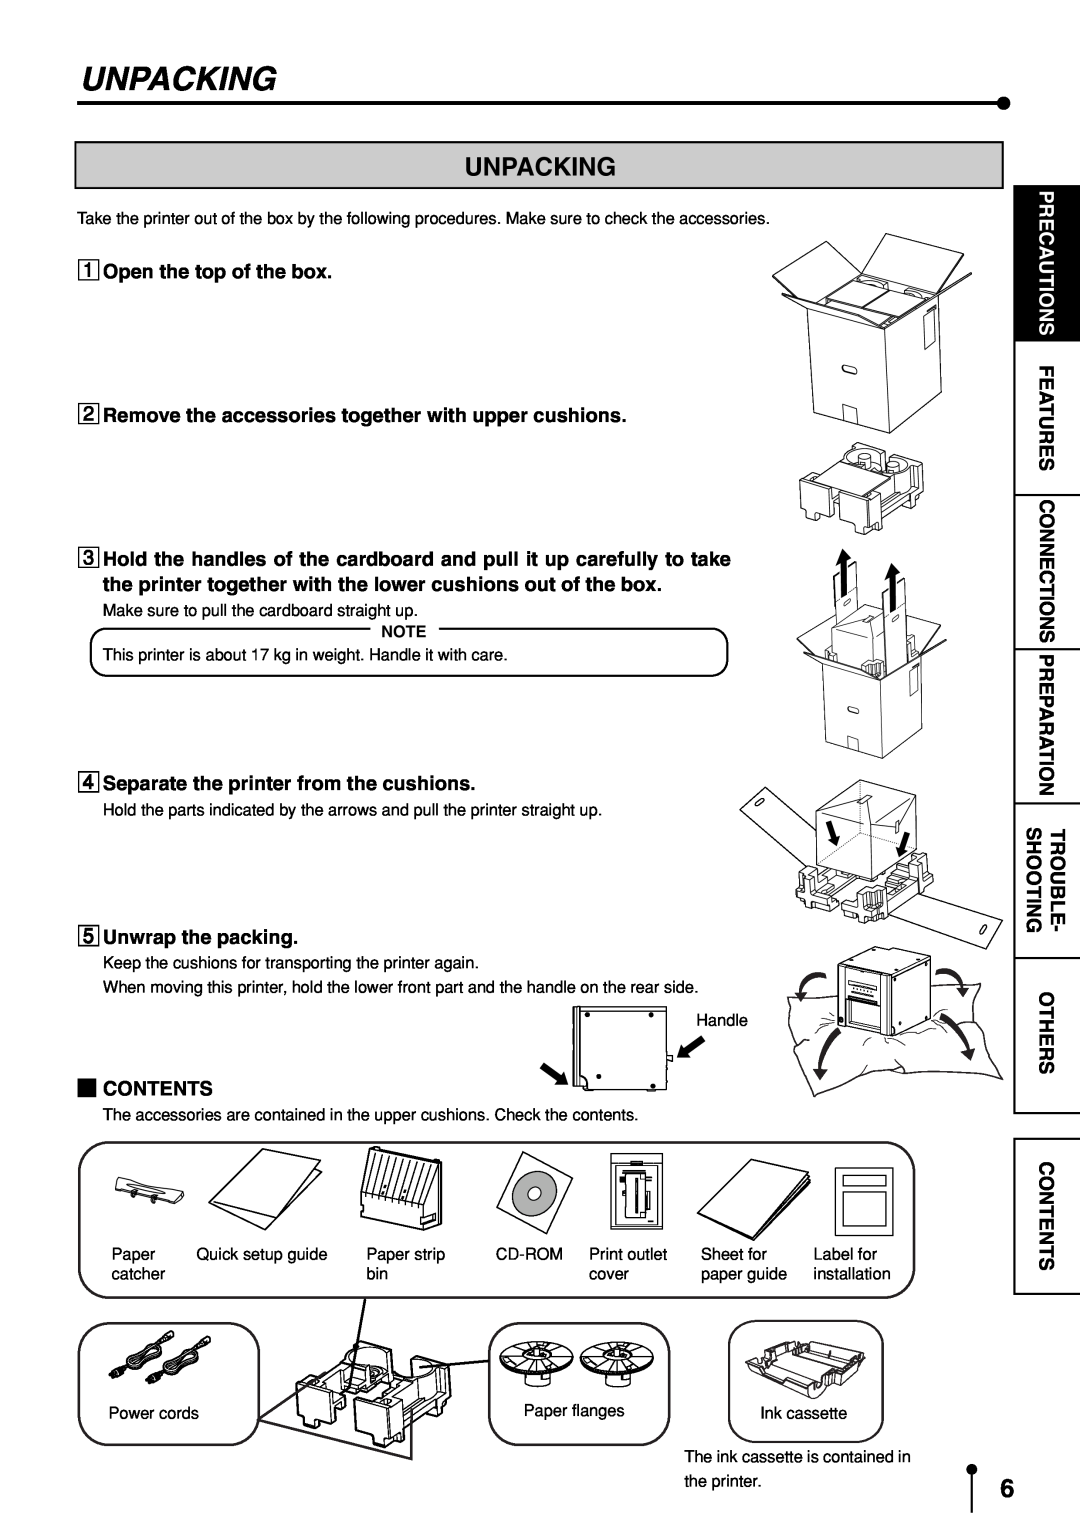 Mitsubishi Electronics CP9600DW-S Unpacking, Open the top of the box, Remove the accessories together with upper cushions 